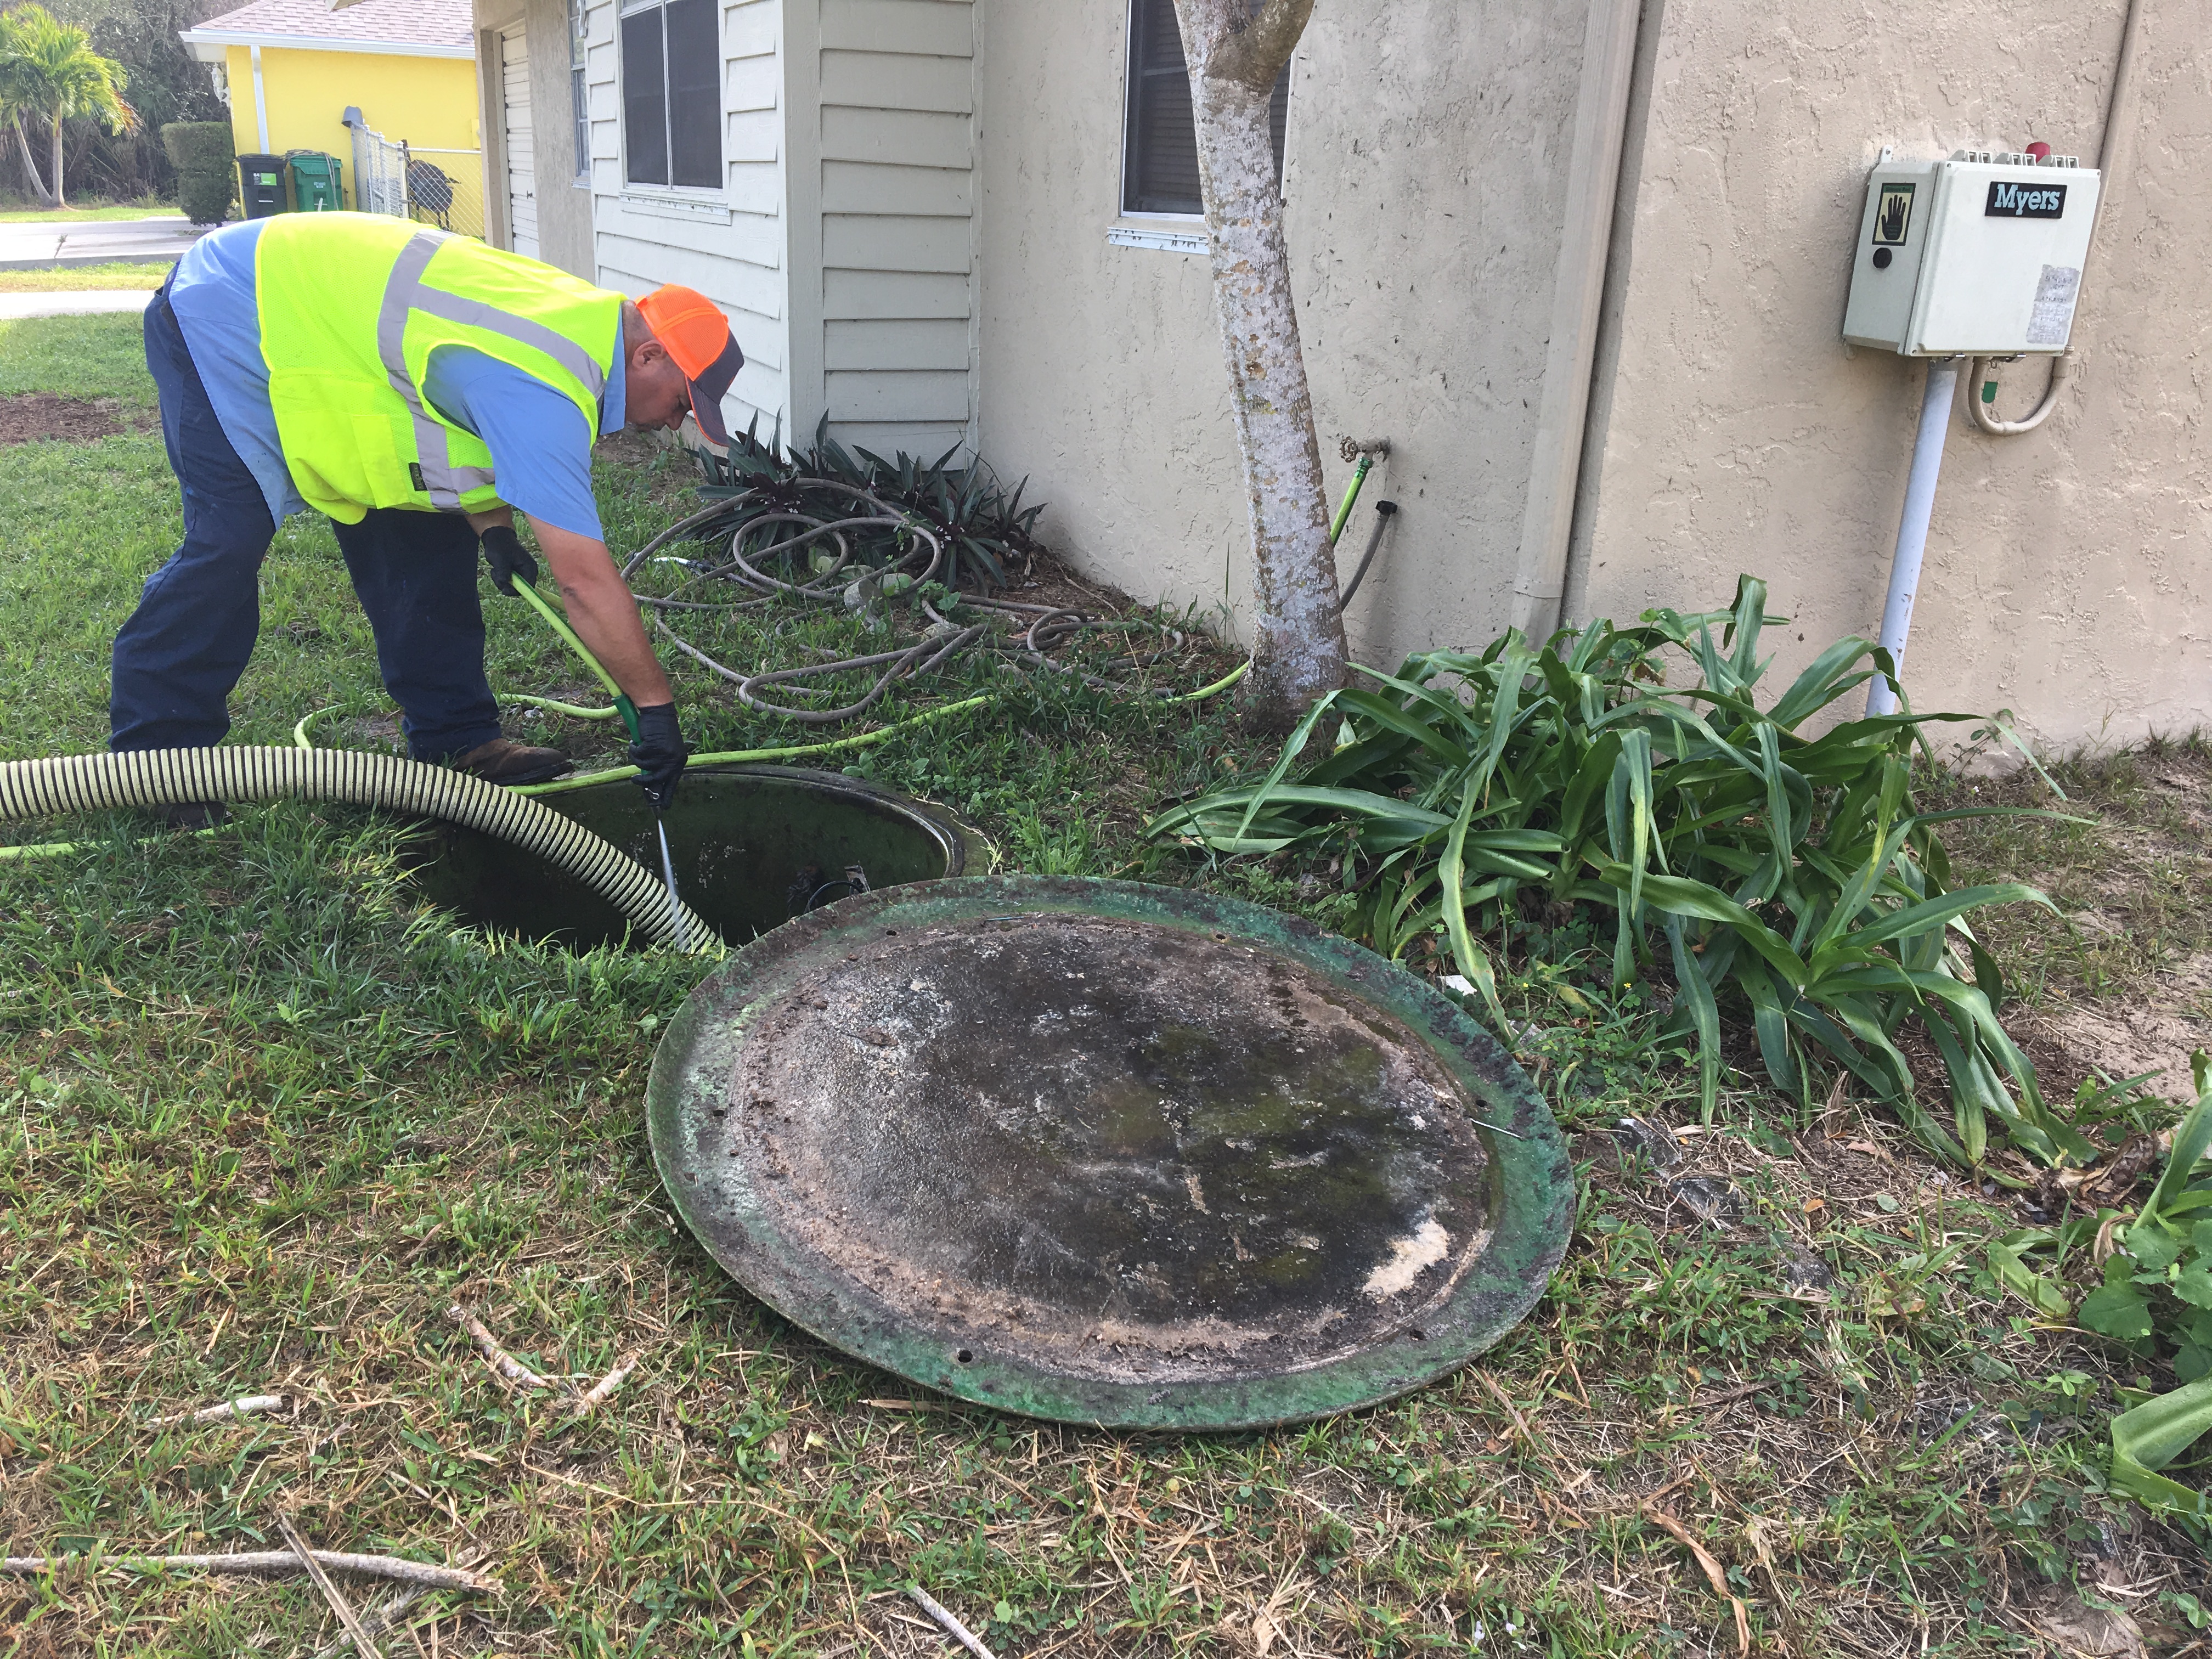 Sewer preventative maintenance employee pumping down a residential grinder